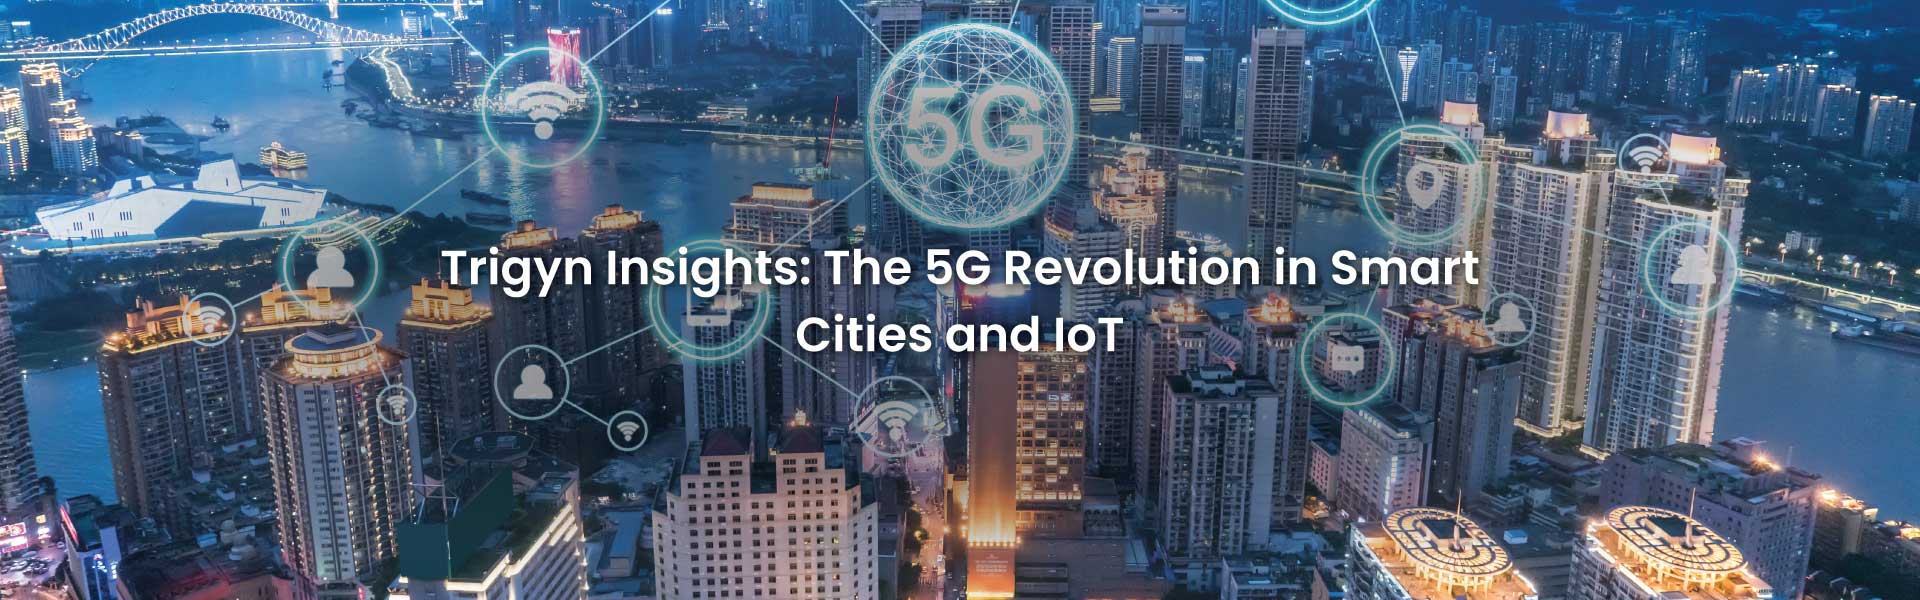  5G in Smart Cities and IoT